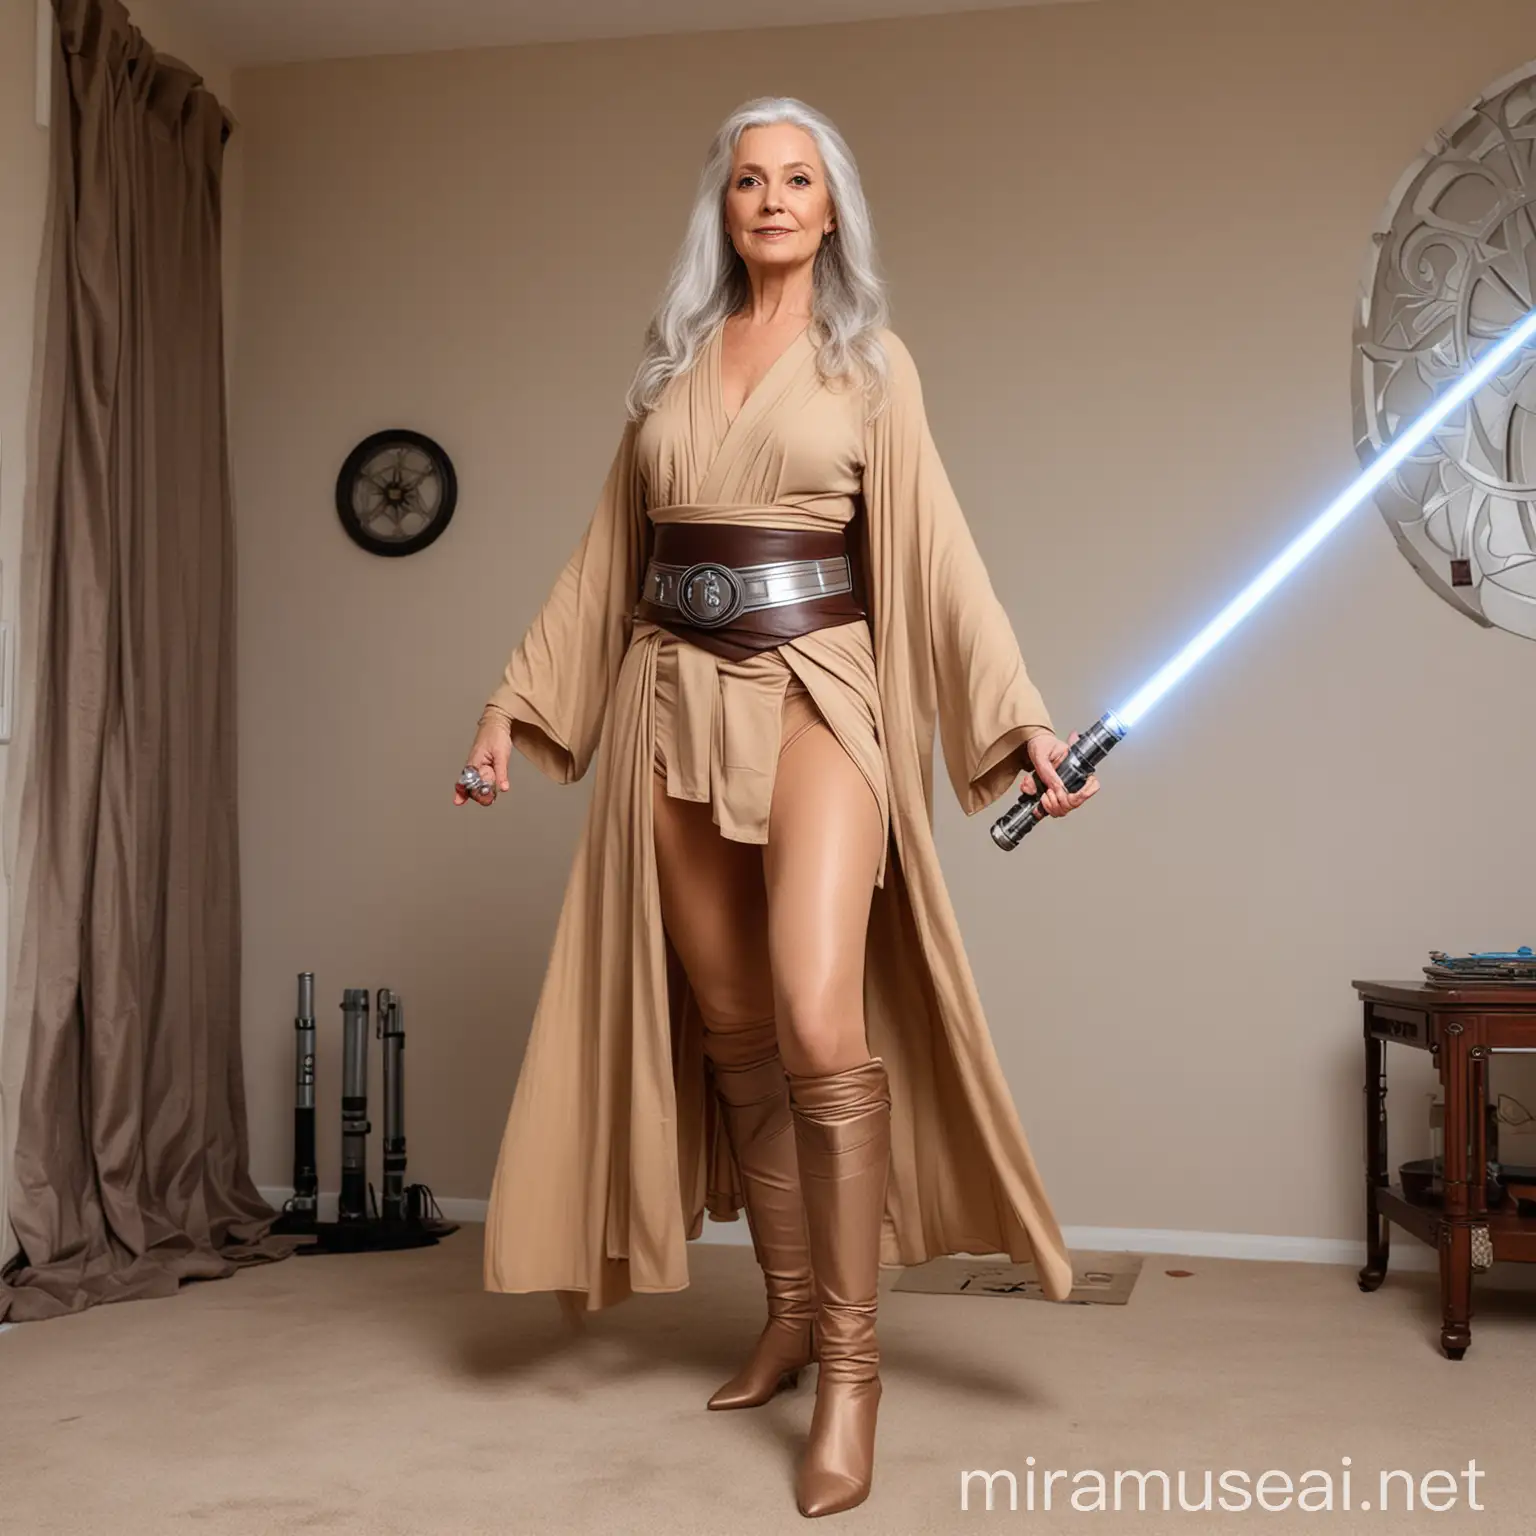 mature lady with long silver hair, wearing tan star wars jedi robes with light saber in tan pantyhose, standing on floor of tatoonie home
